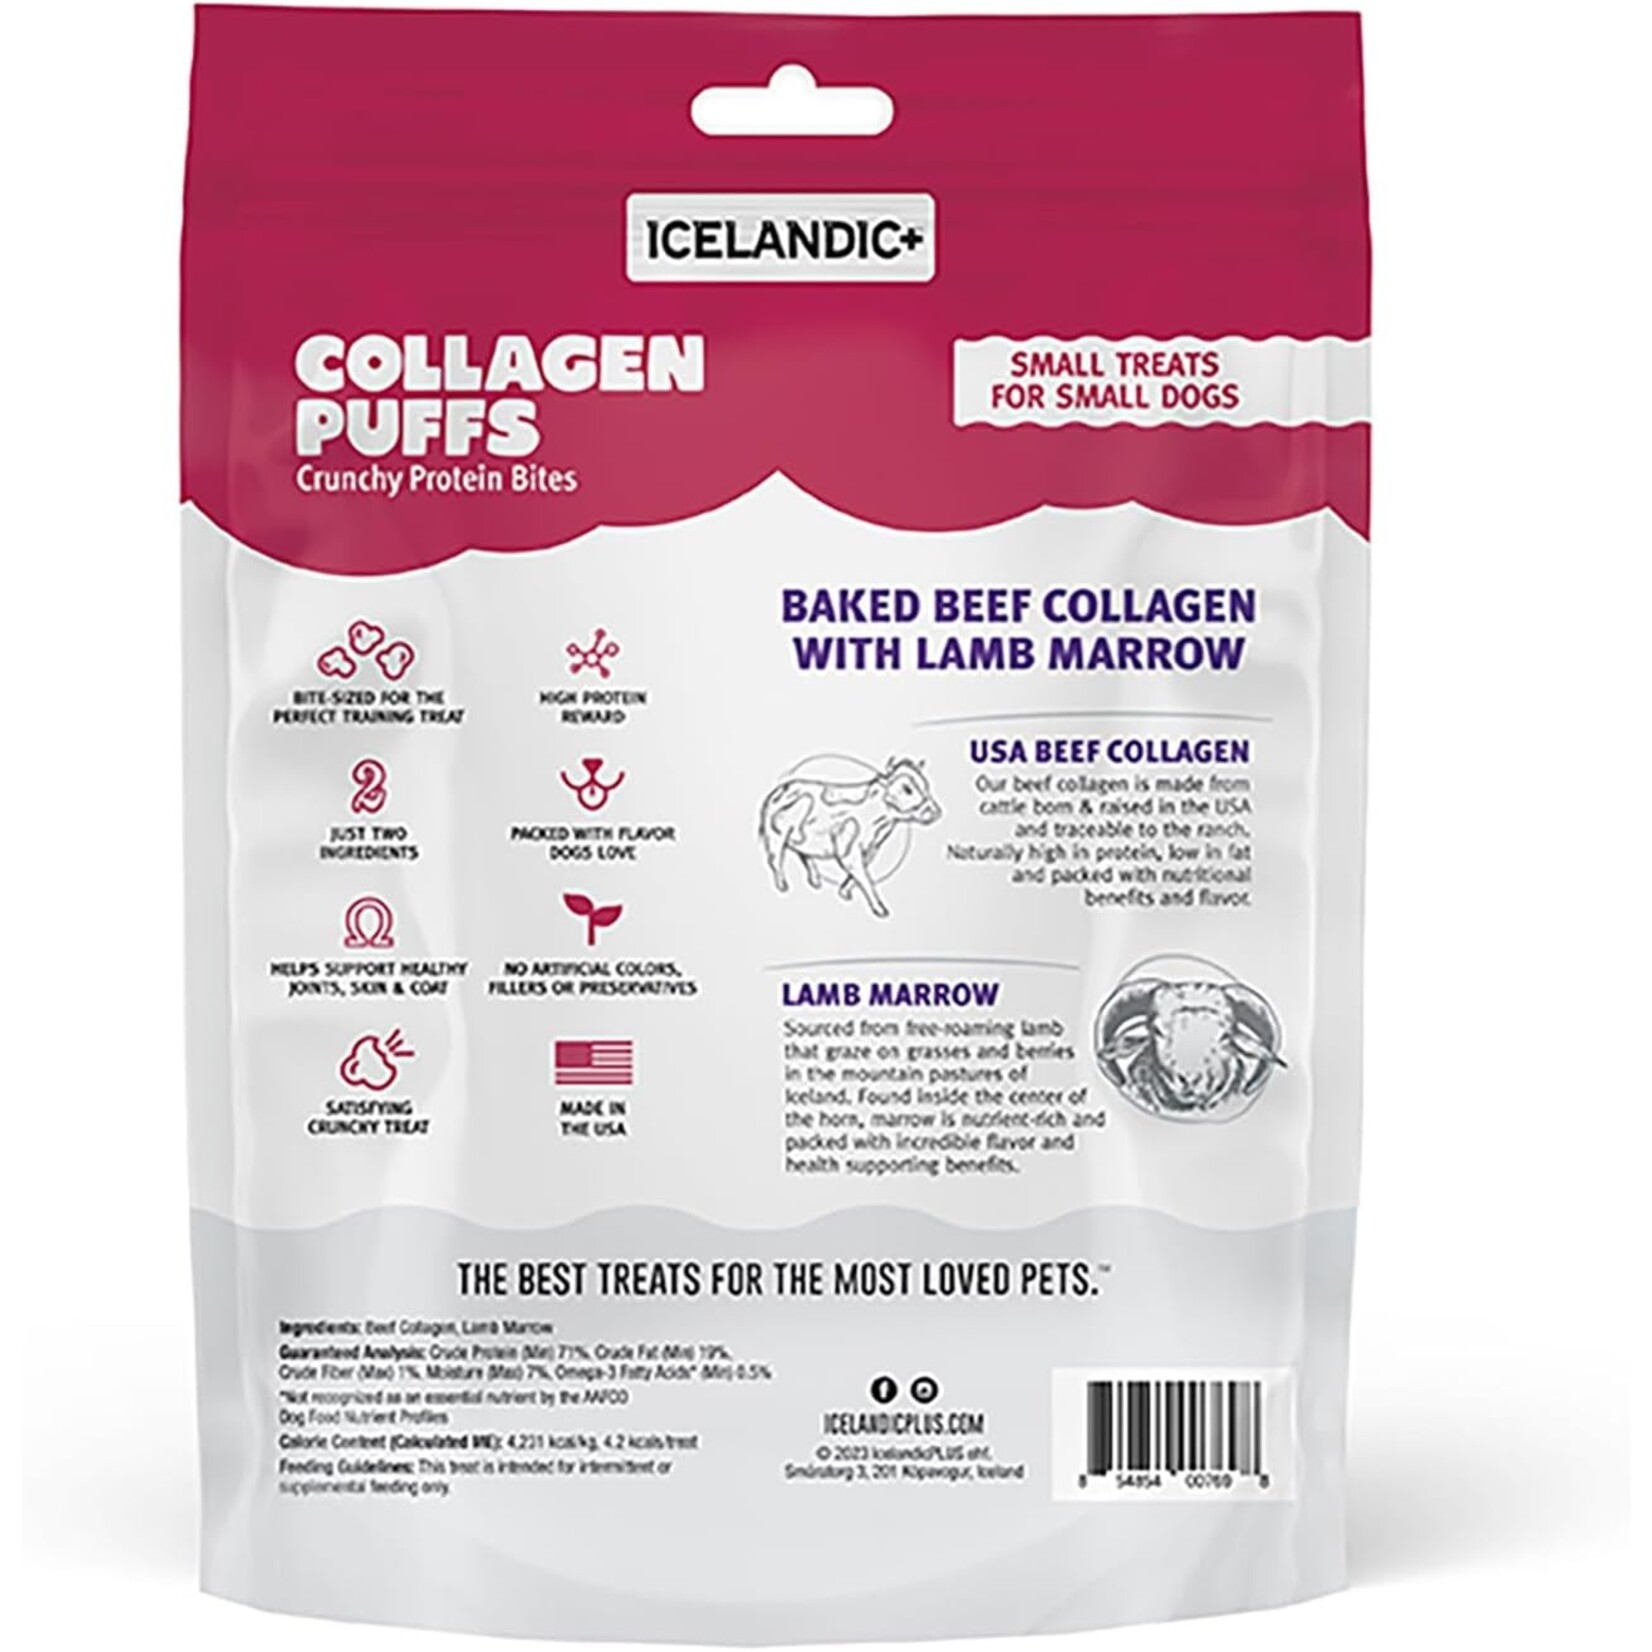 Icelandic+ Icelandic+ Beef Collagen Puffs with Marrow Treats for Small Dogs 1.3oz